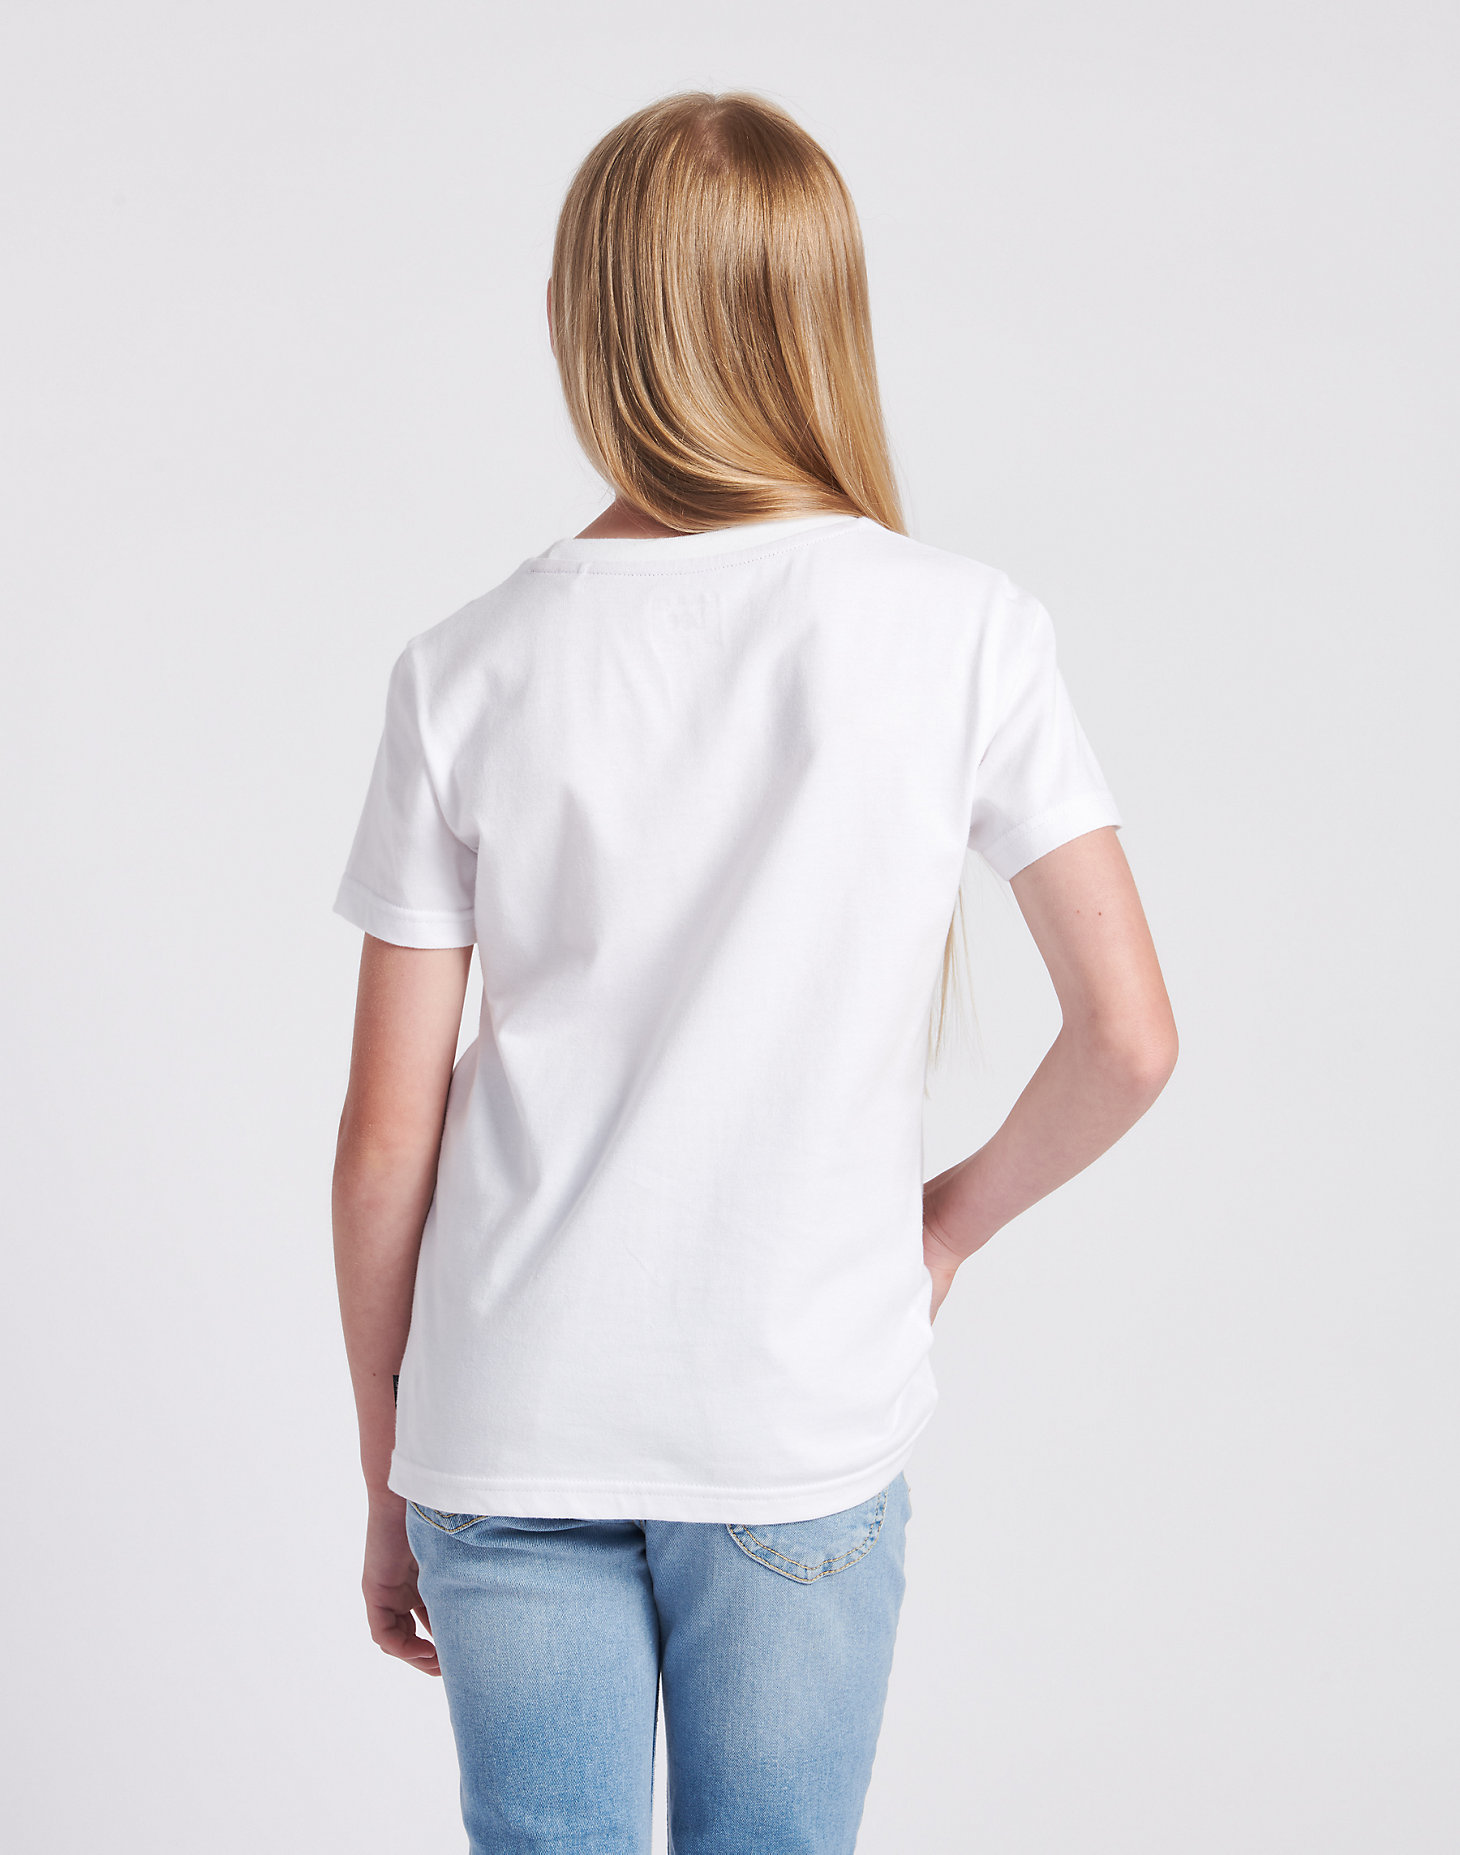 Wobbly Graphic Tee in Bright White alternative view 1